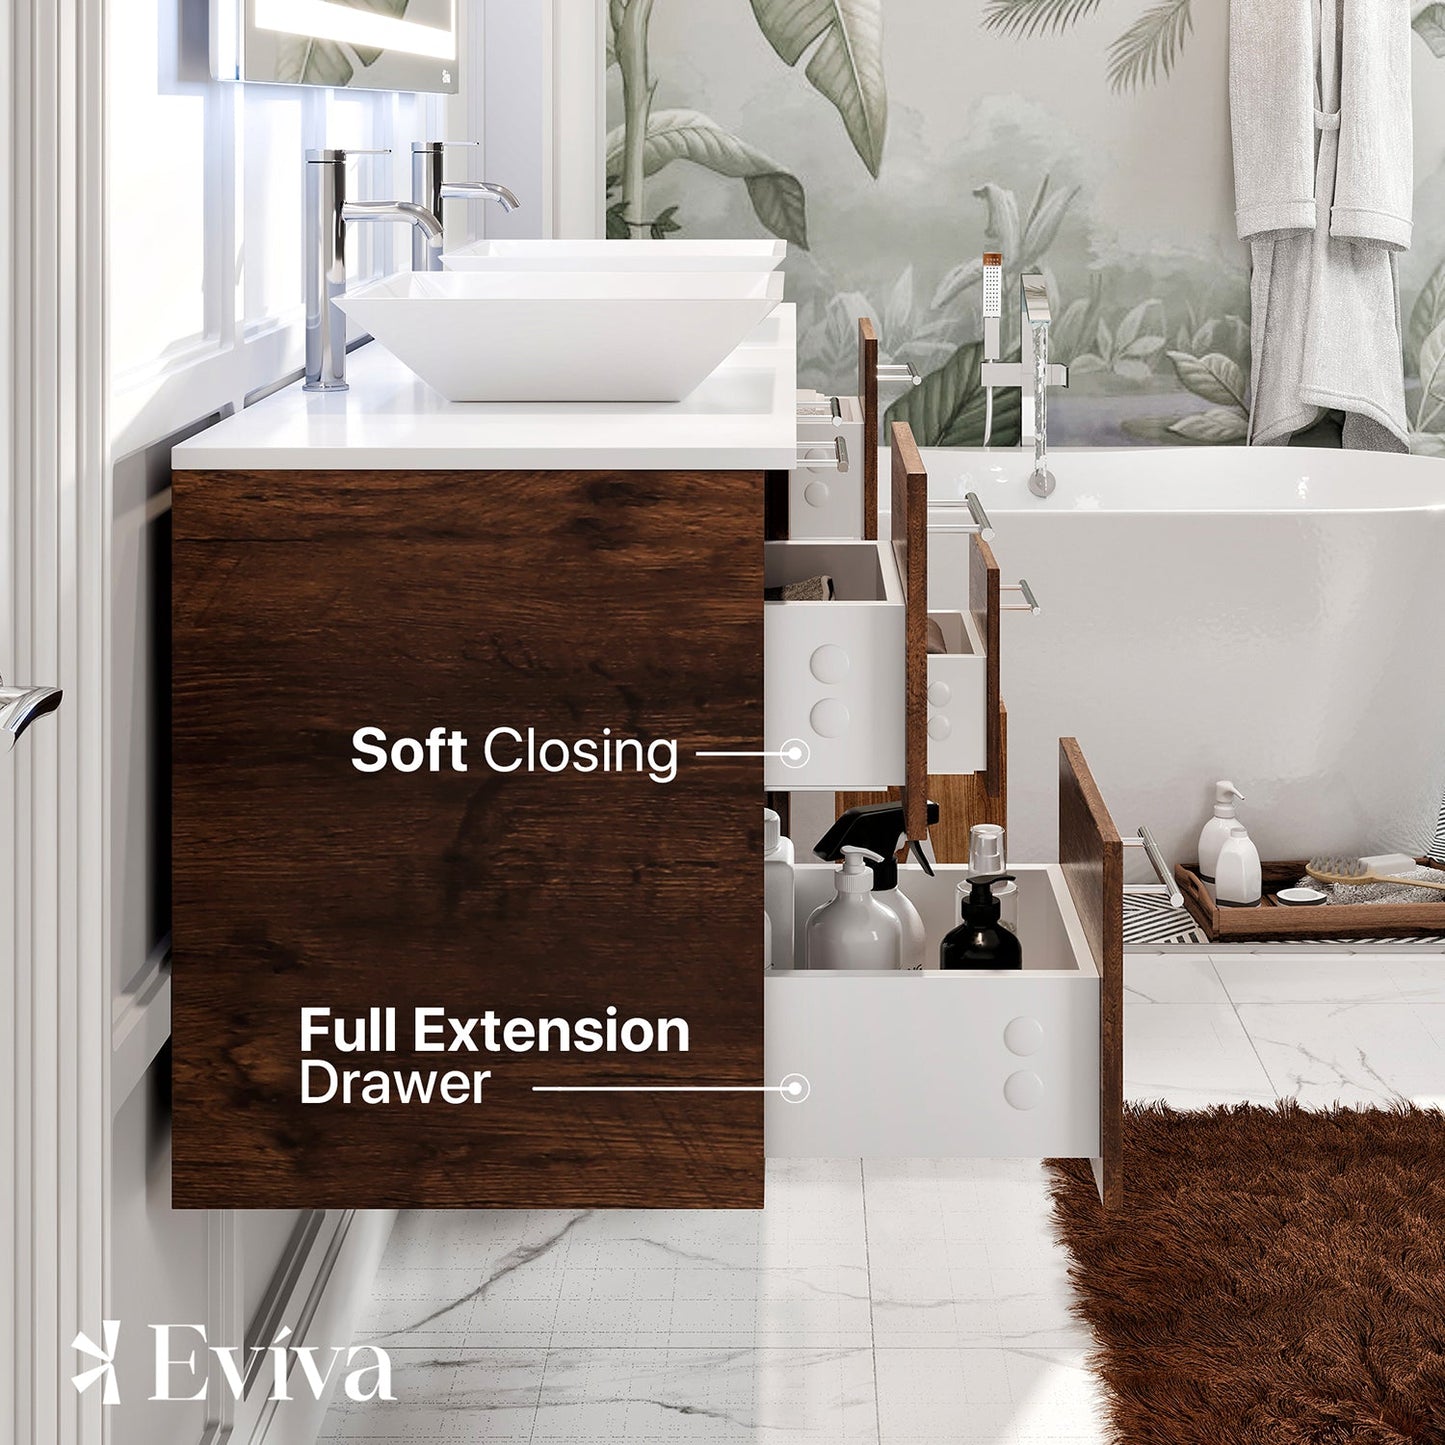 Luxurious 60"W x 22"D Rosewood Double Sink Wall Mount Bathroom Vanity with White Quartz Countertop and Vessel Porcelain Sink